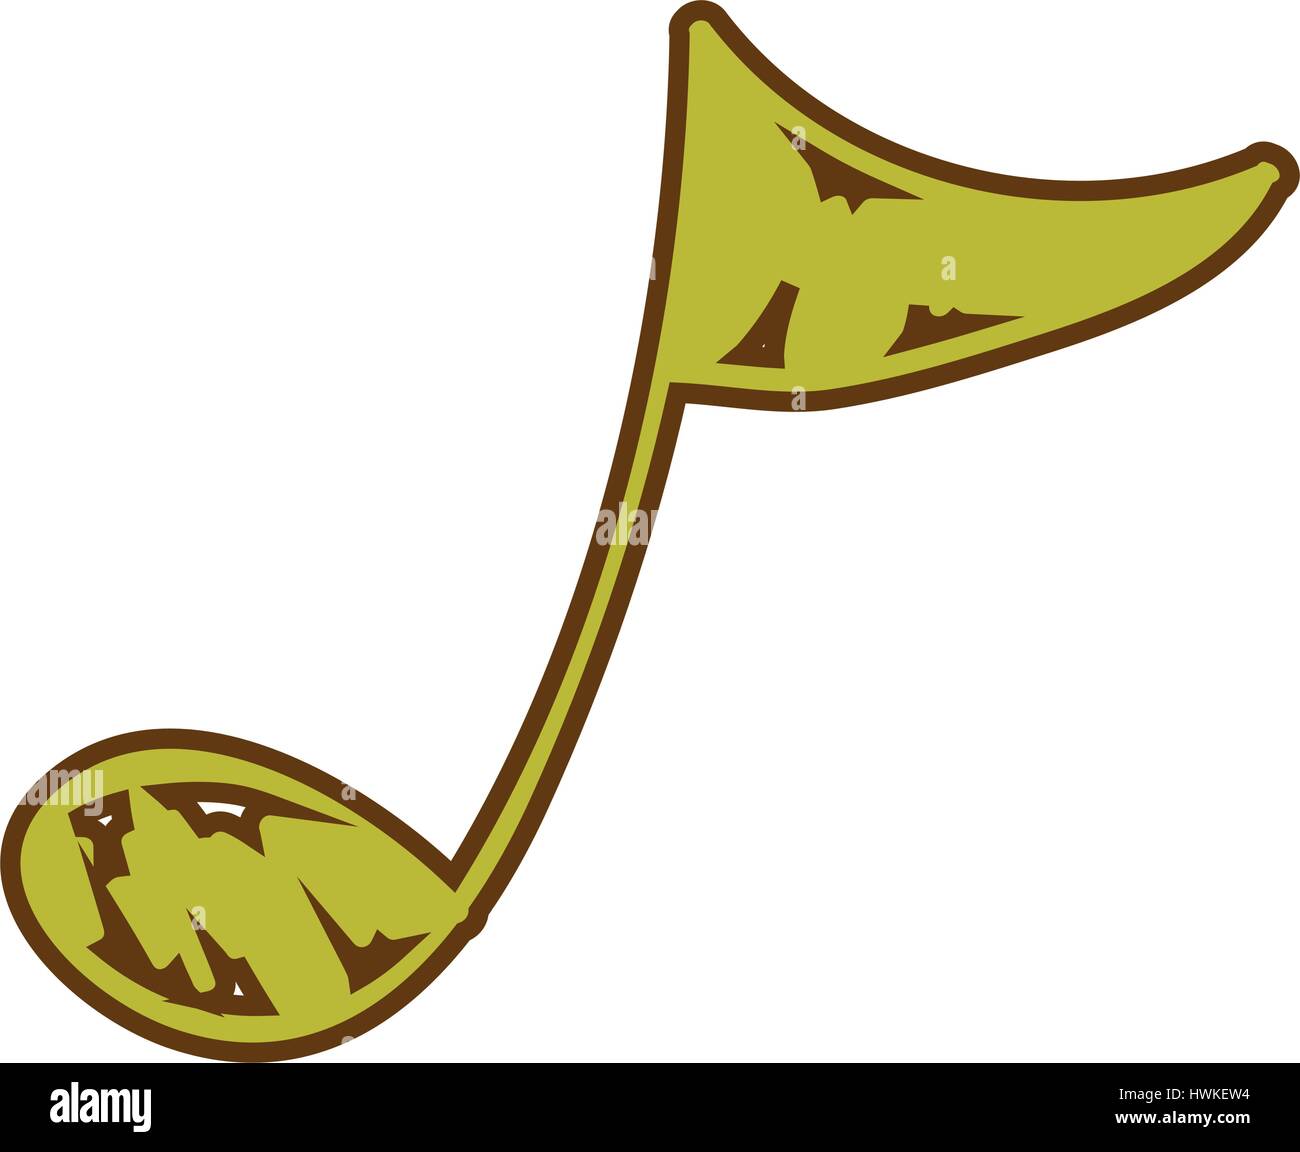 sign music note icon Stock Vector